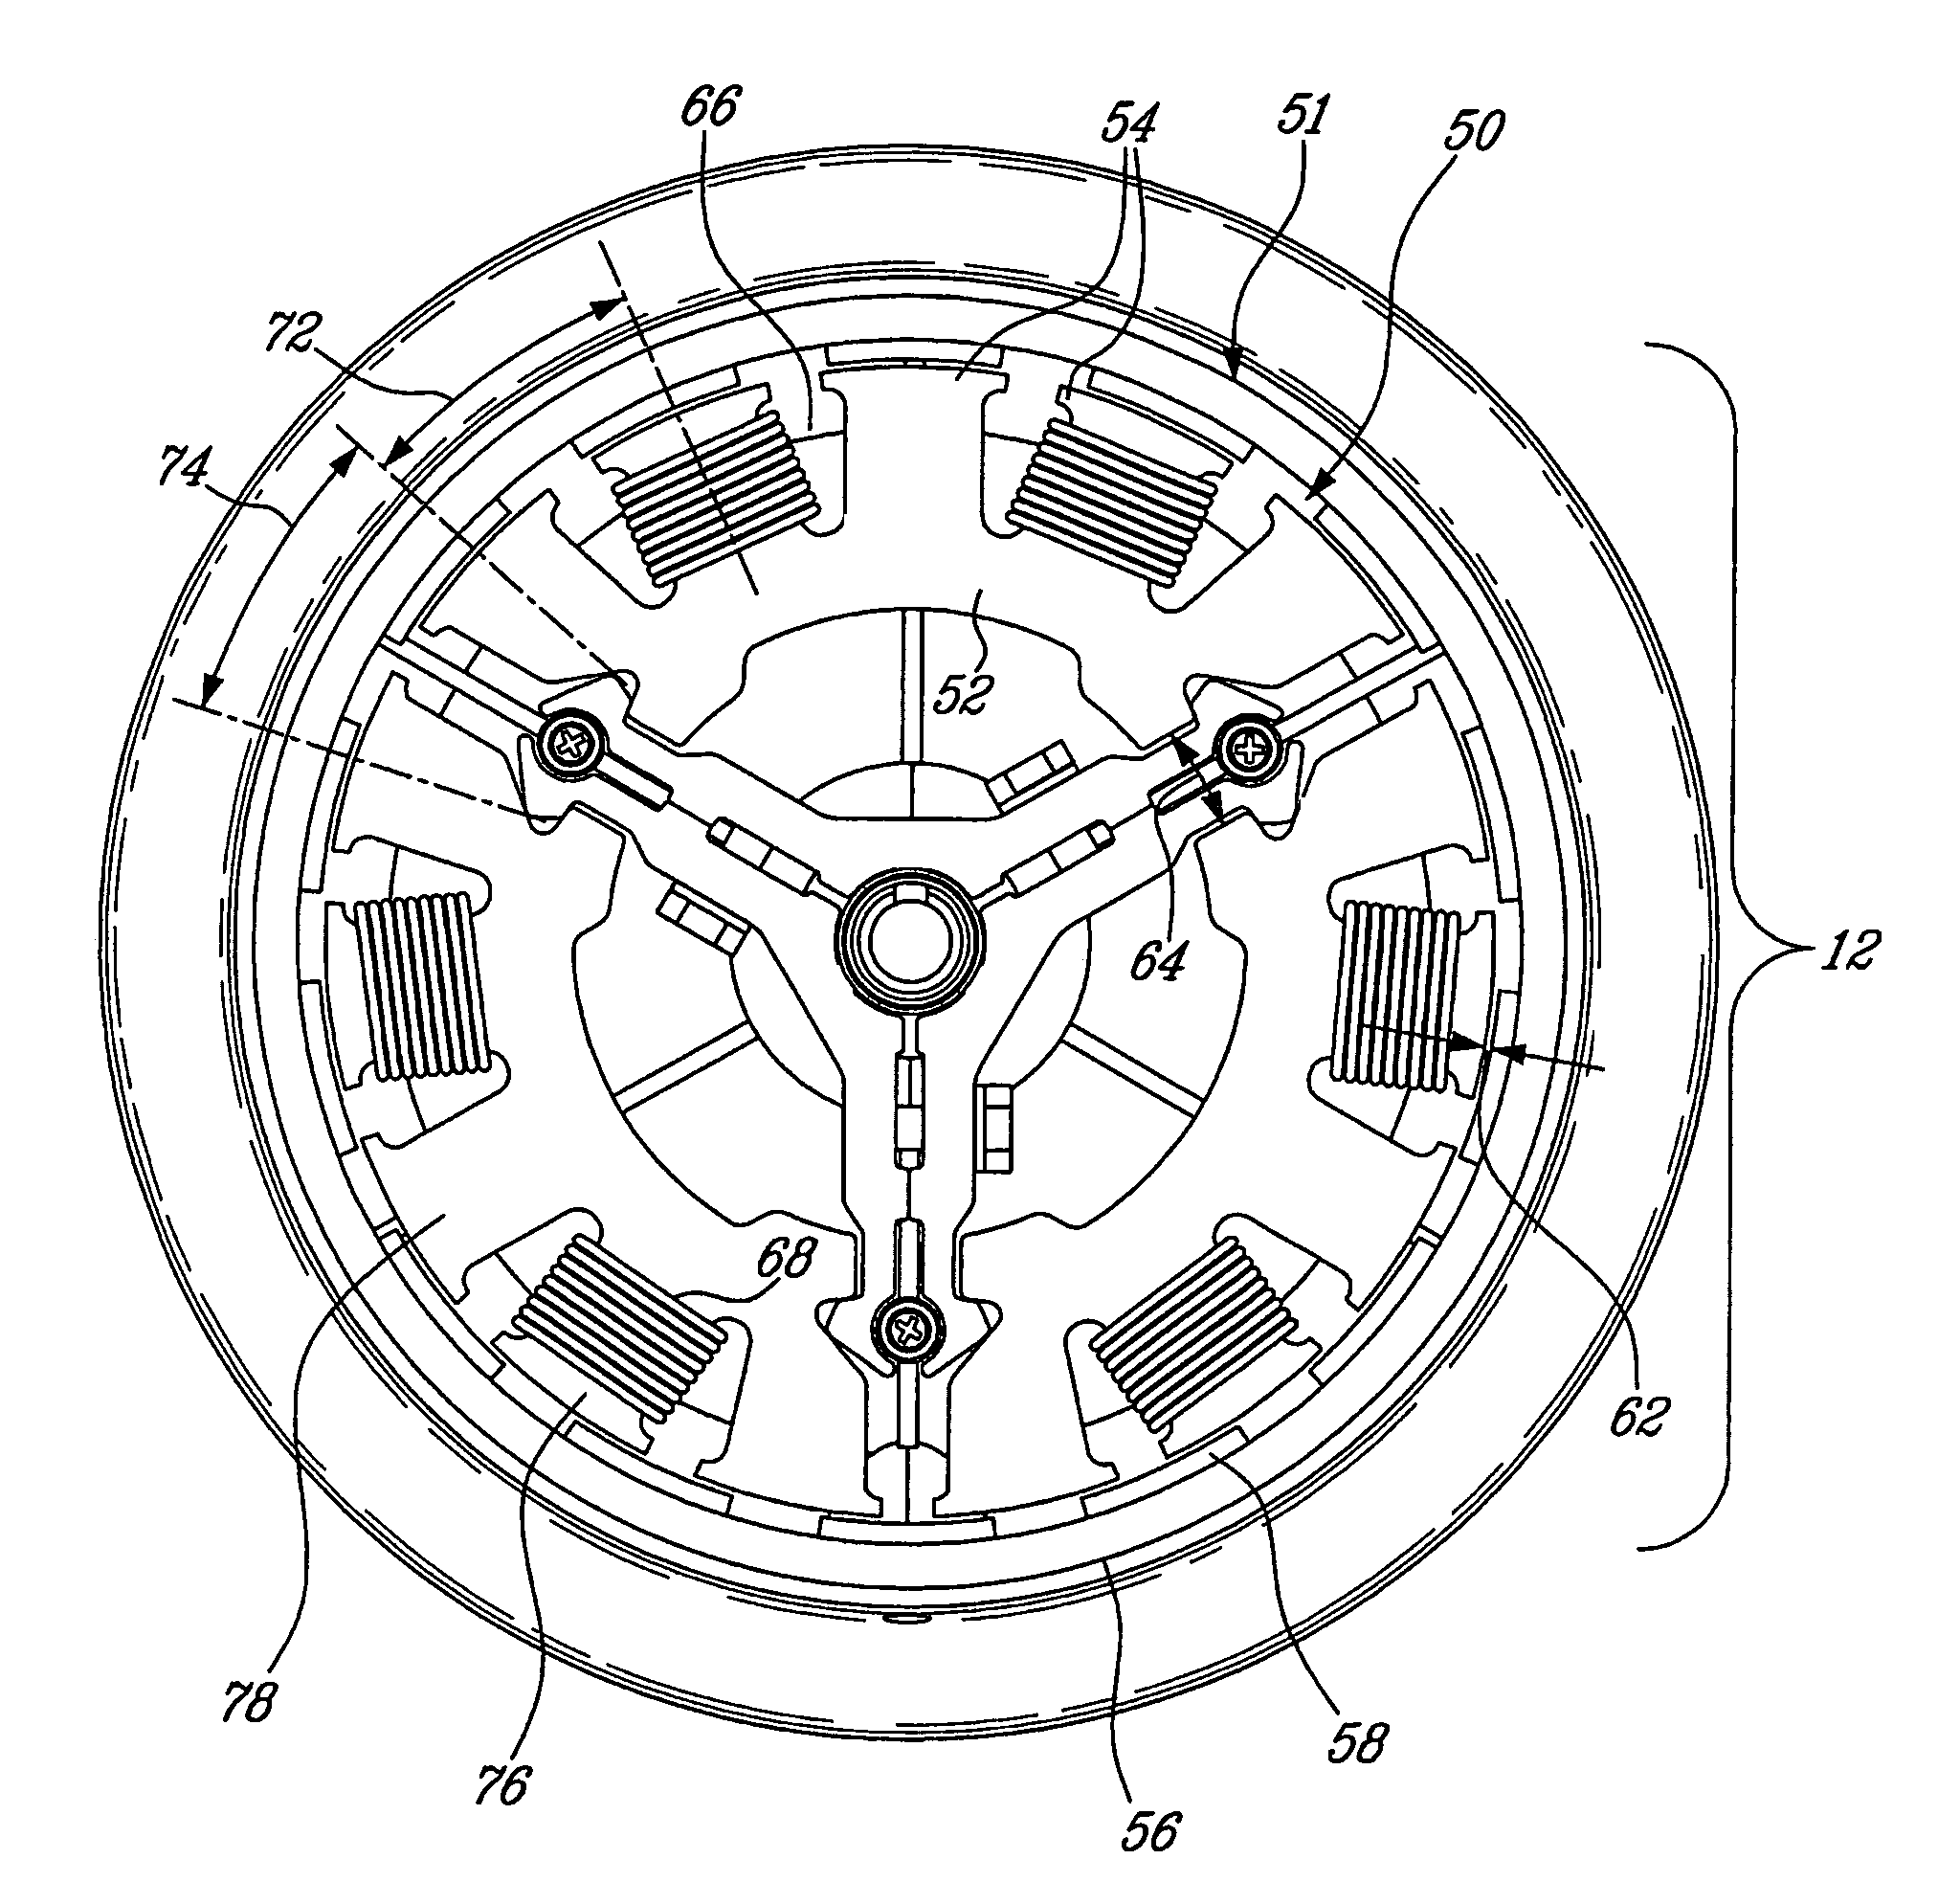 Multi-phase electrical motor for use in a wheel